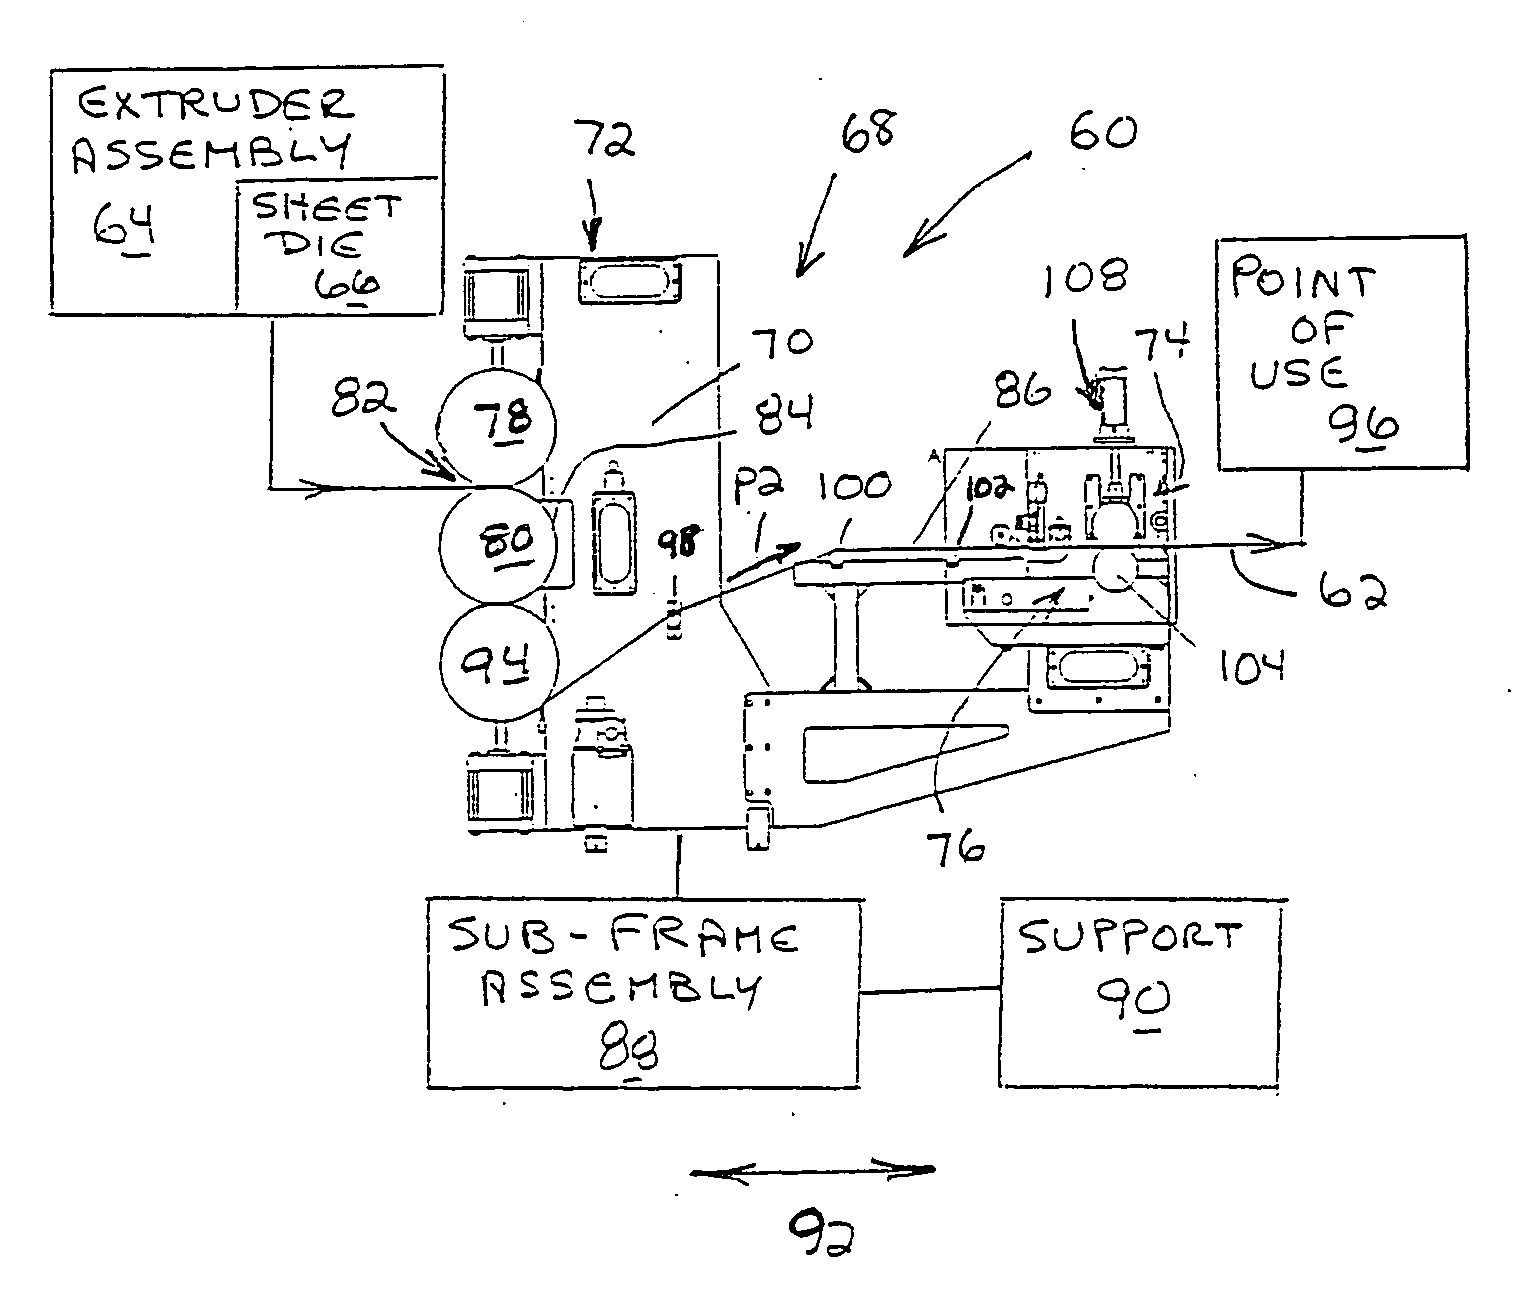 Sheet coating system on an apparatus for extrusion forming a sheet product